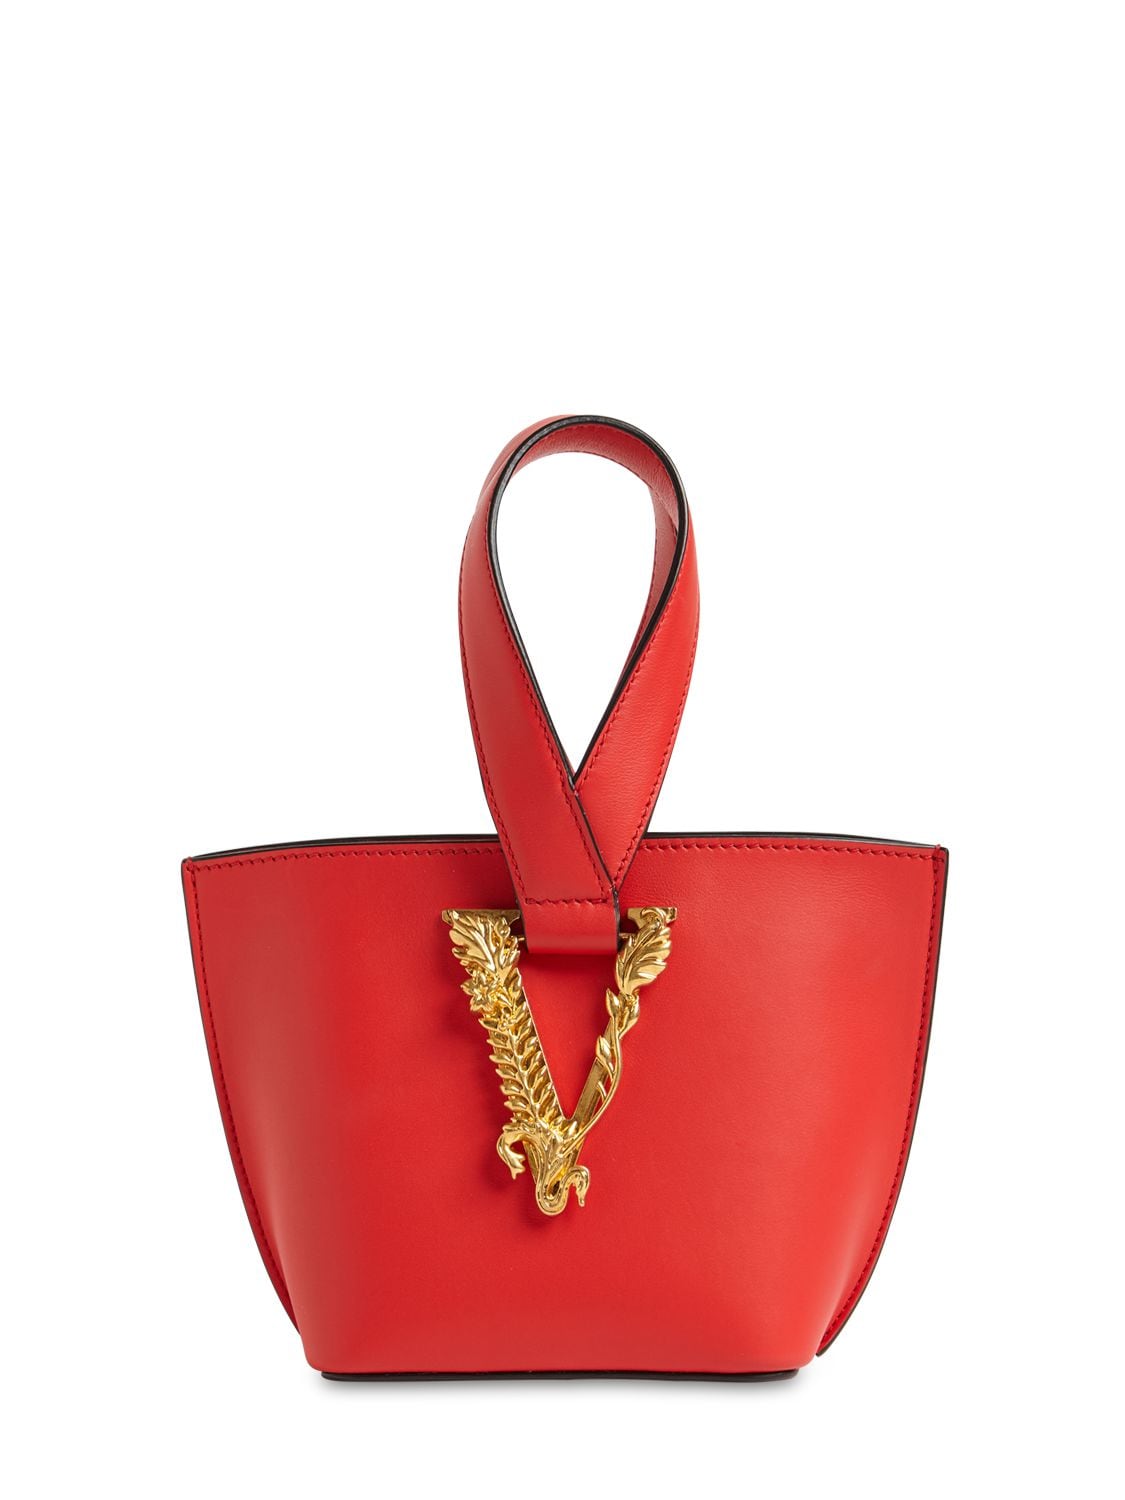 Versace Virtus Leather Top Handle Bag In Red | ModeSens